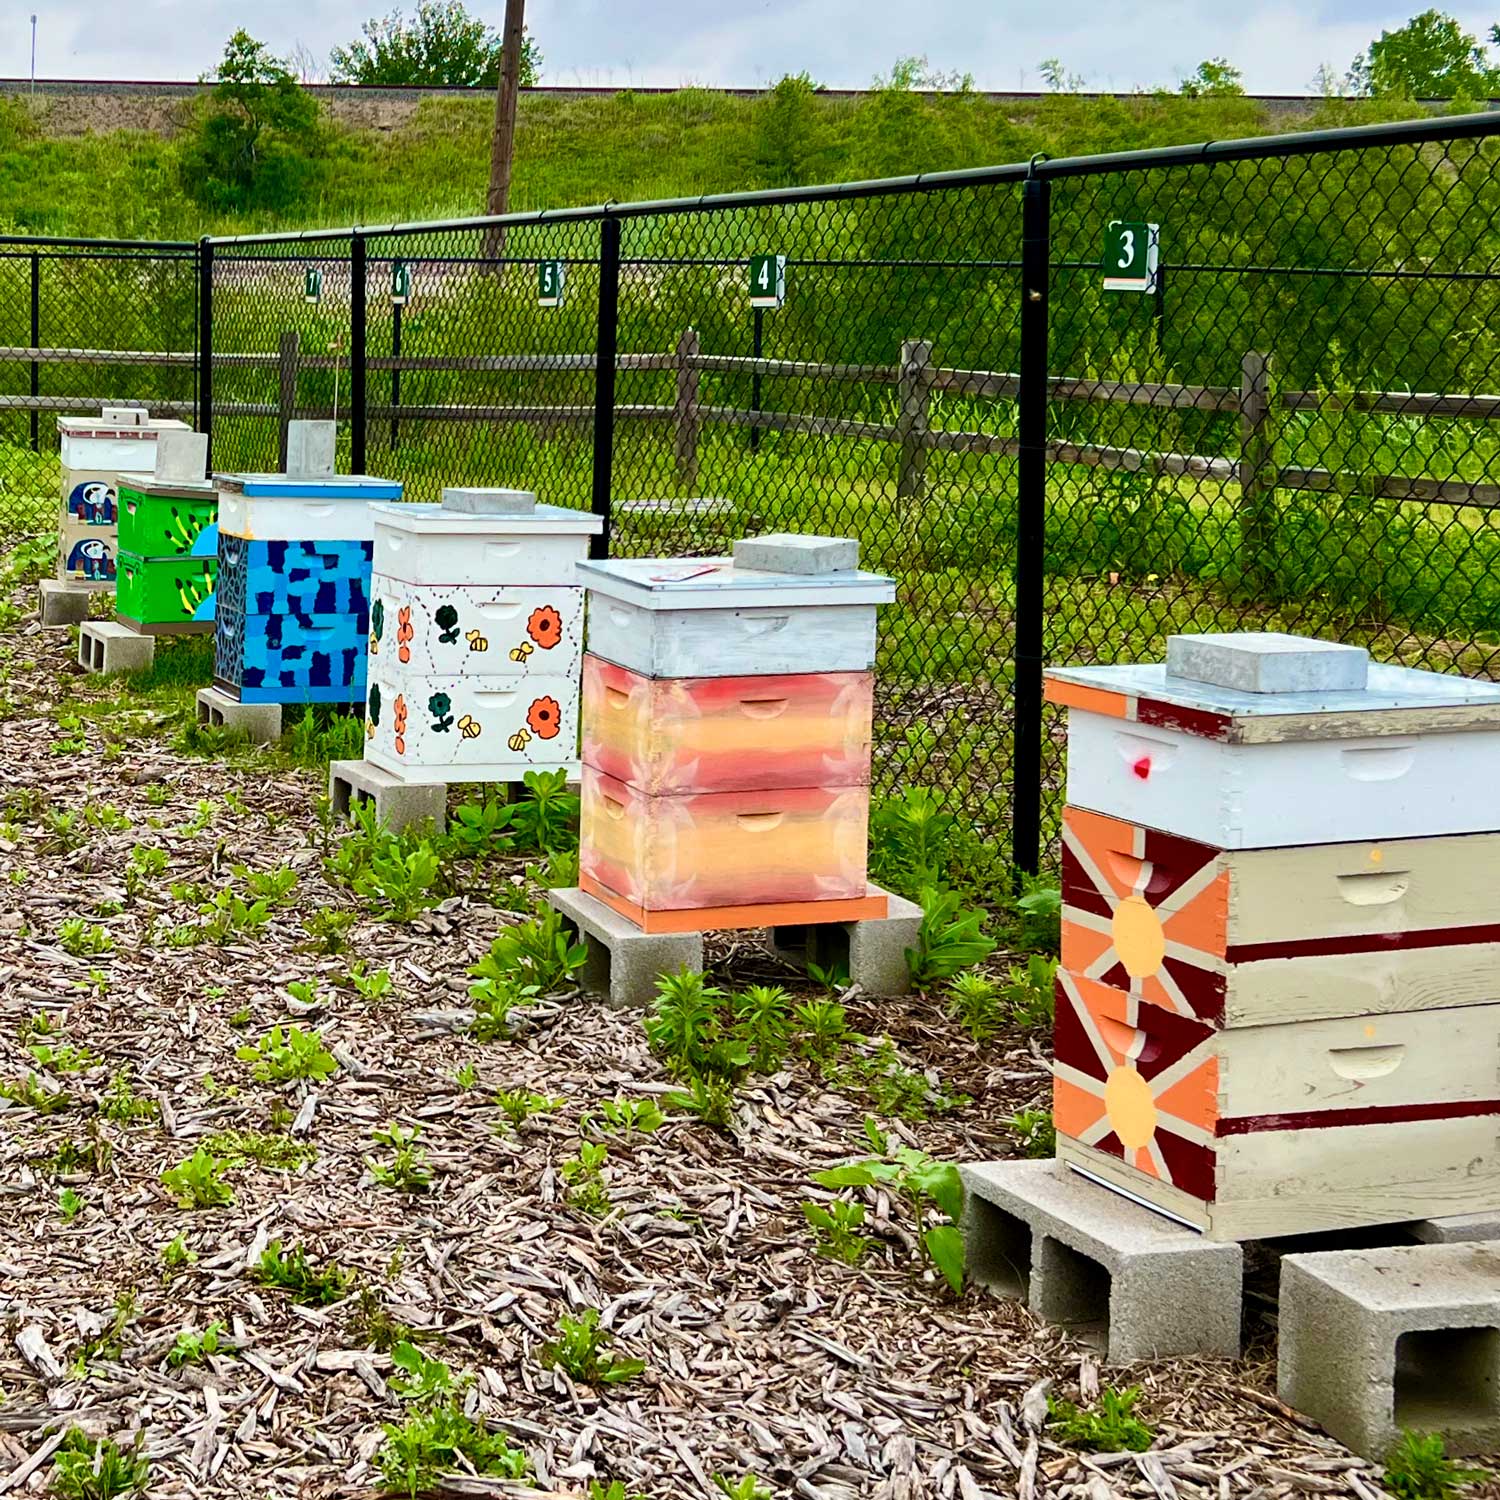 A row of hives in the Bee Apiary at the Eco Hub.